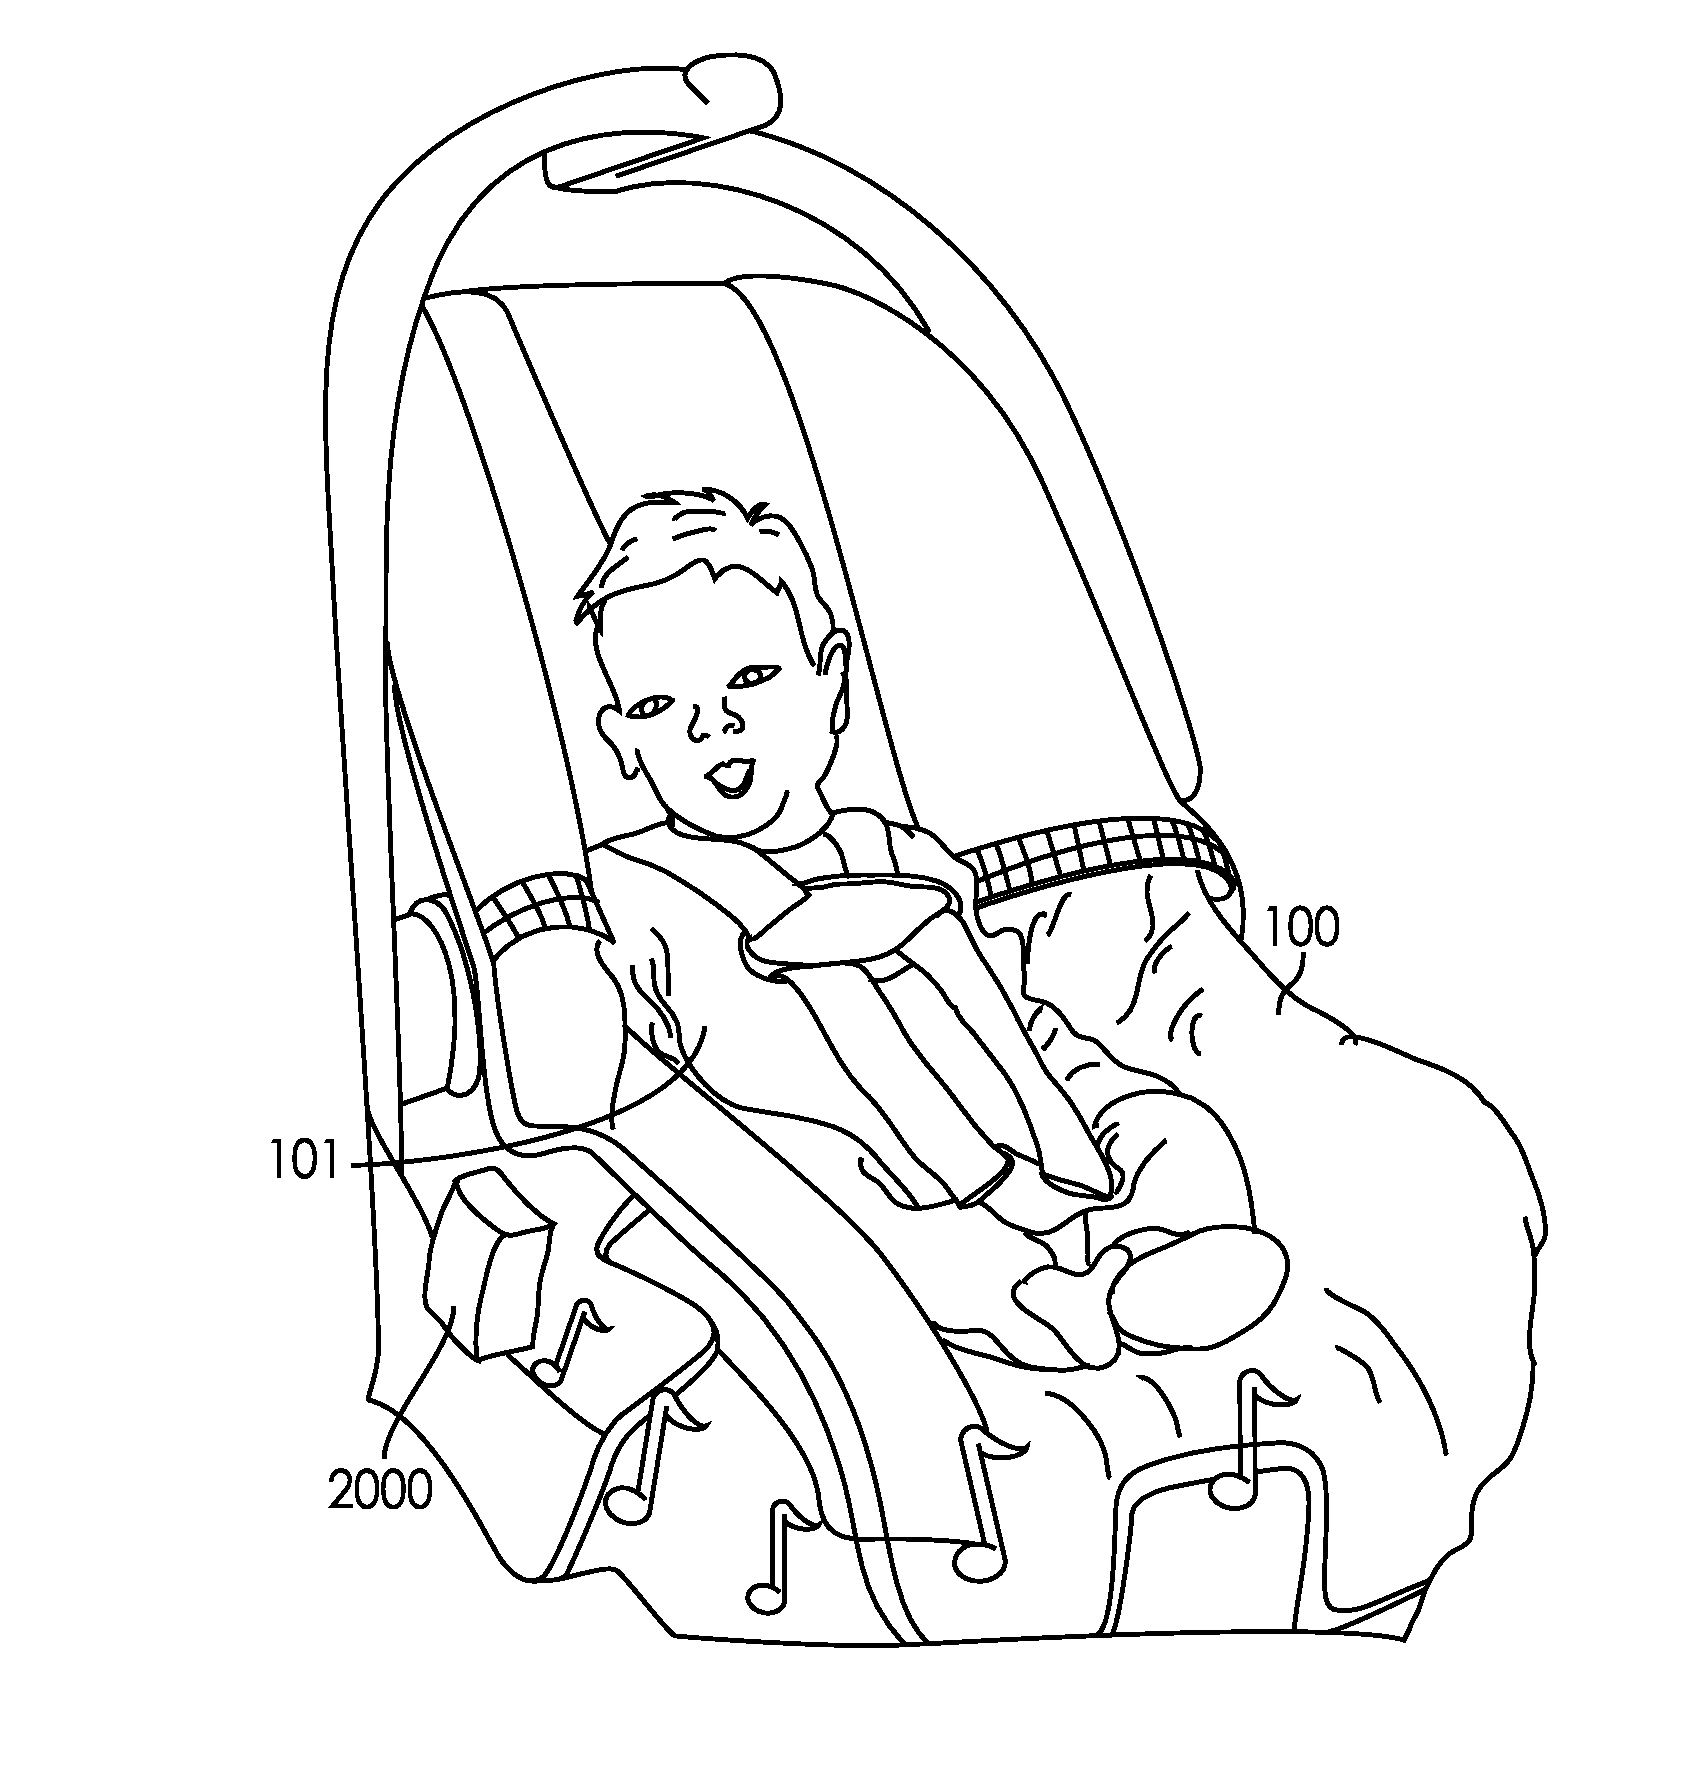 Systems and Methods for Determining if a Child Safety Seat is in a Moving Vehicle